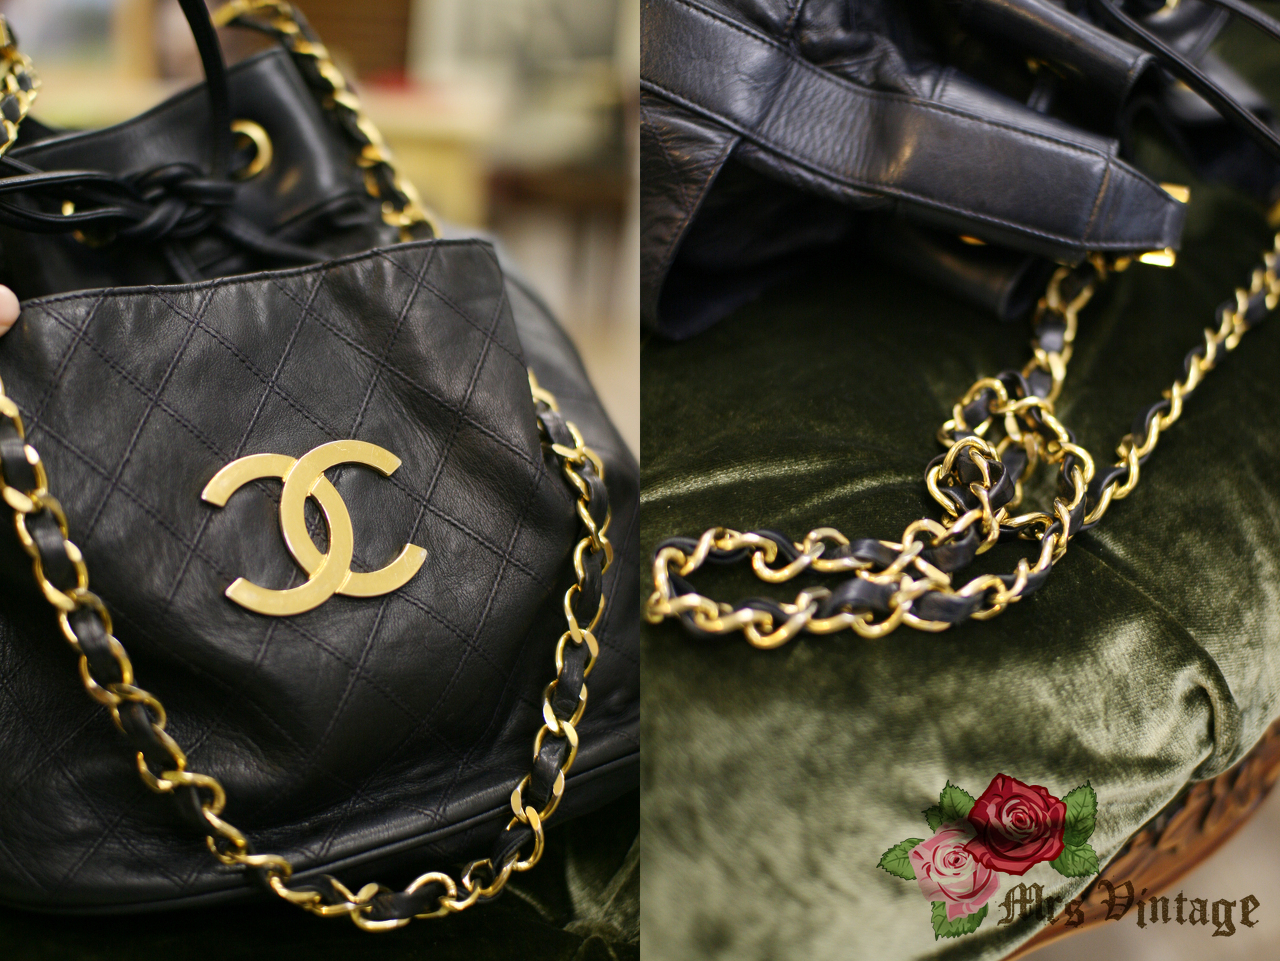 Vintage Chanel Black Lambskin Large Bucket Bag - Mrs Vintage - Selling  Vintage Wedding Lace Dress / Gowns & Accessories from 1920s – 1990s. And many  One of a kind Treasures such